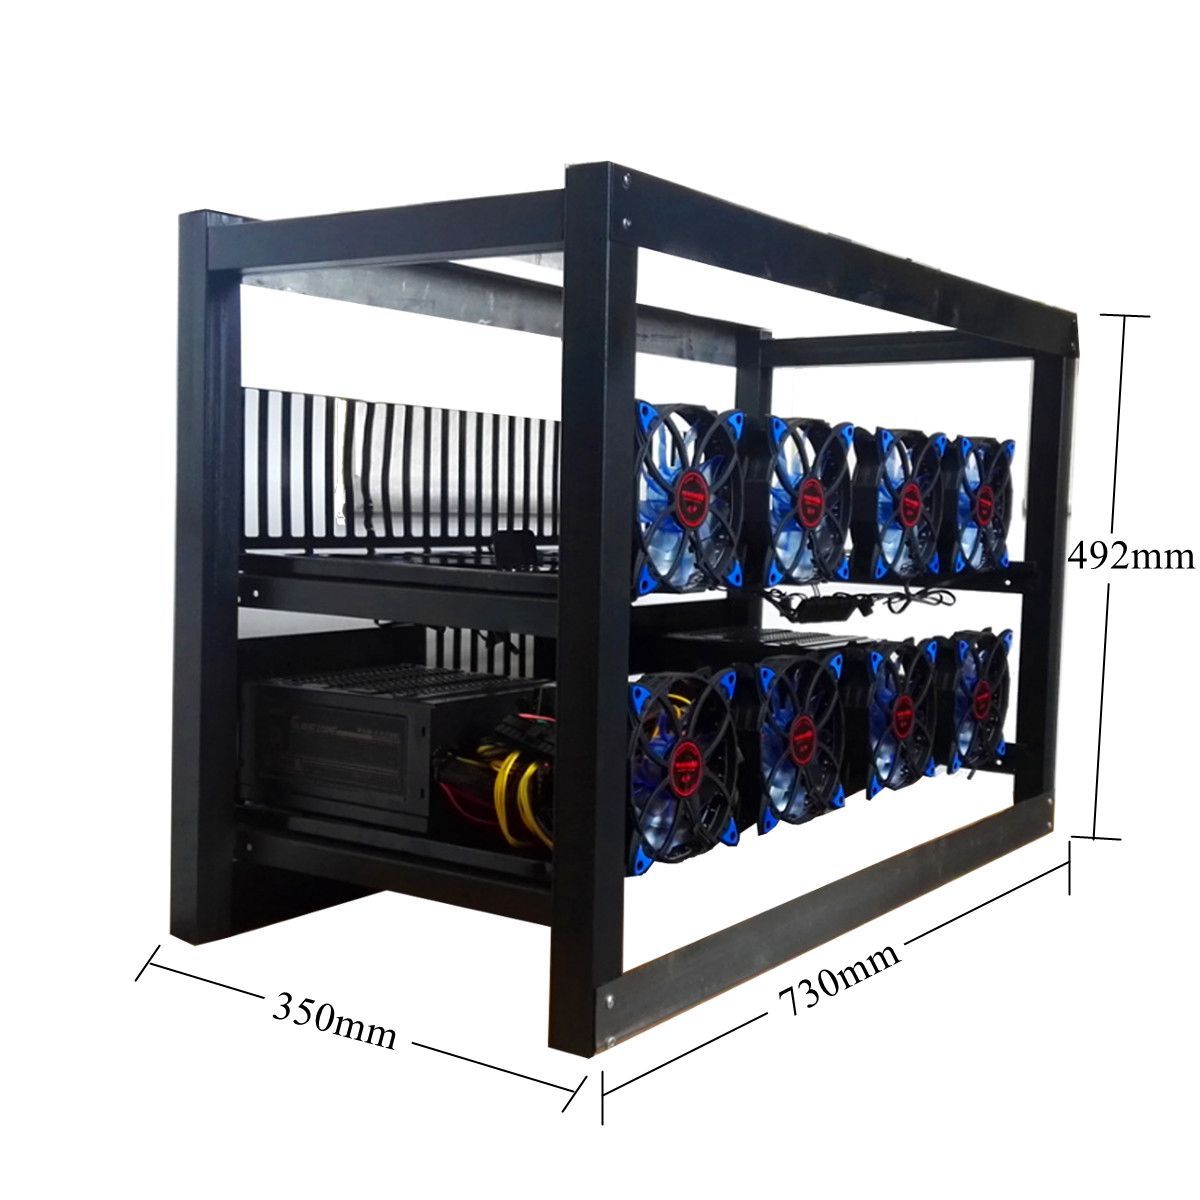 Aluminum-Crypto-Open-Air-Mining-Miner-Frame-Rig-Case-For-8-GPU-Ethereum-12-Fan-1205663